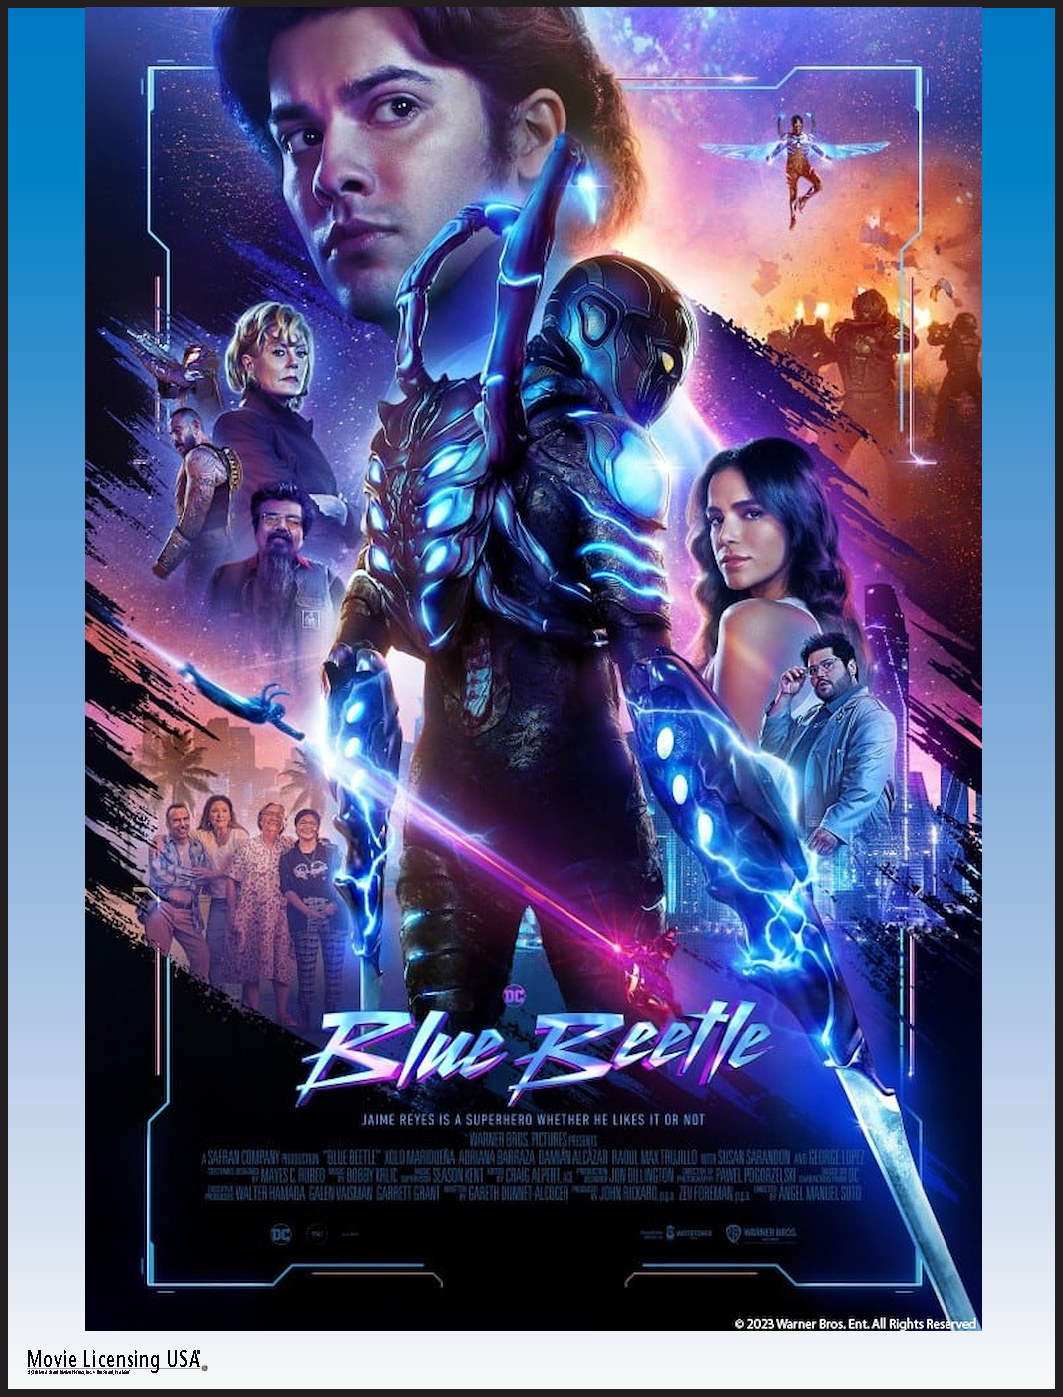 Blue Beetle is Smyrna Public Library's Free Comic Book Day Movie Matinee, playing May 4 at 2pm